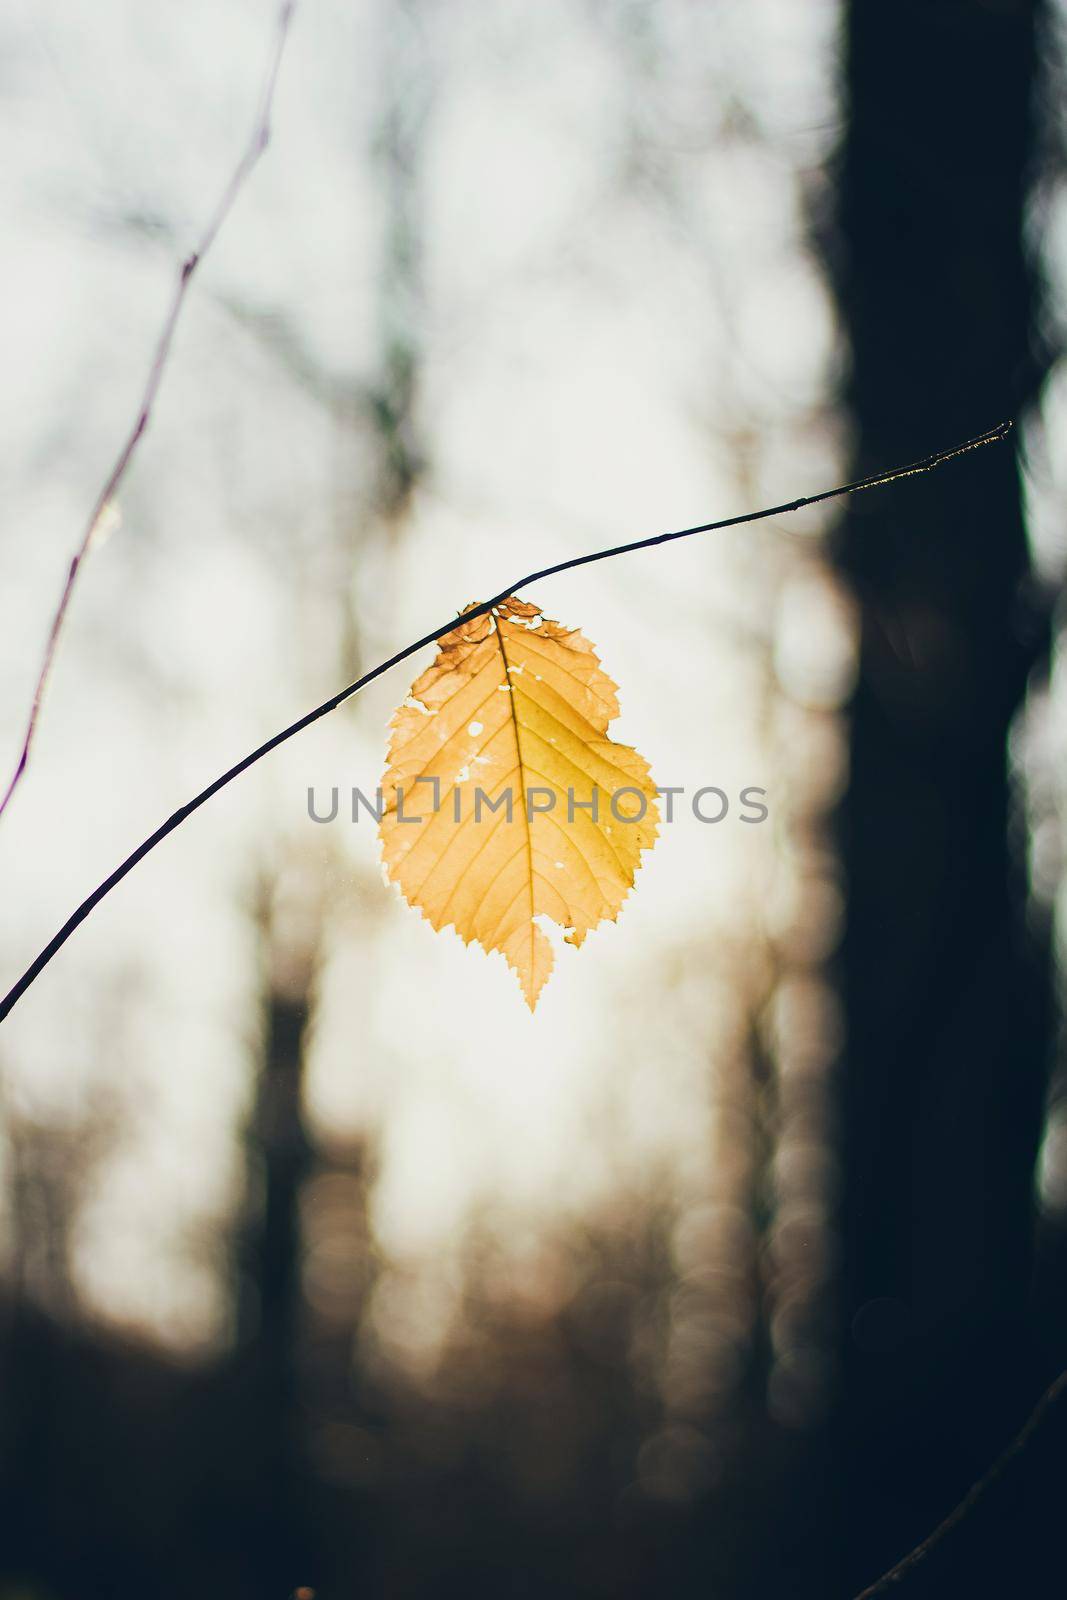 A lonely yellow leaf on a branch ib the autumn forest by mmp1206